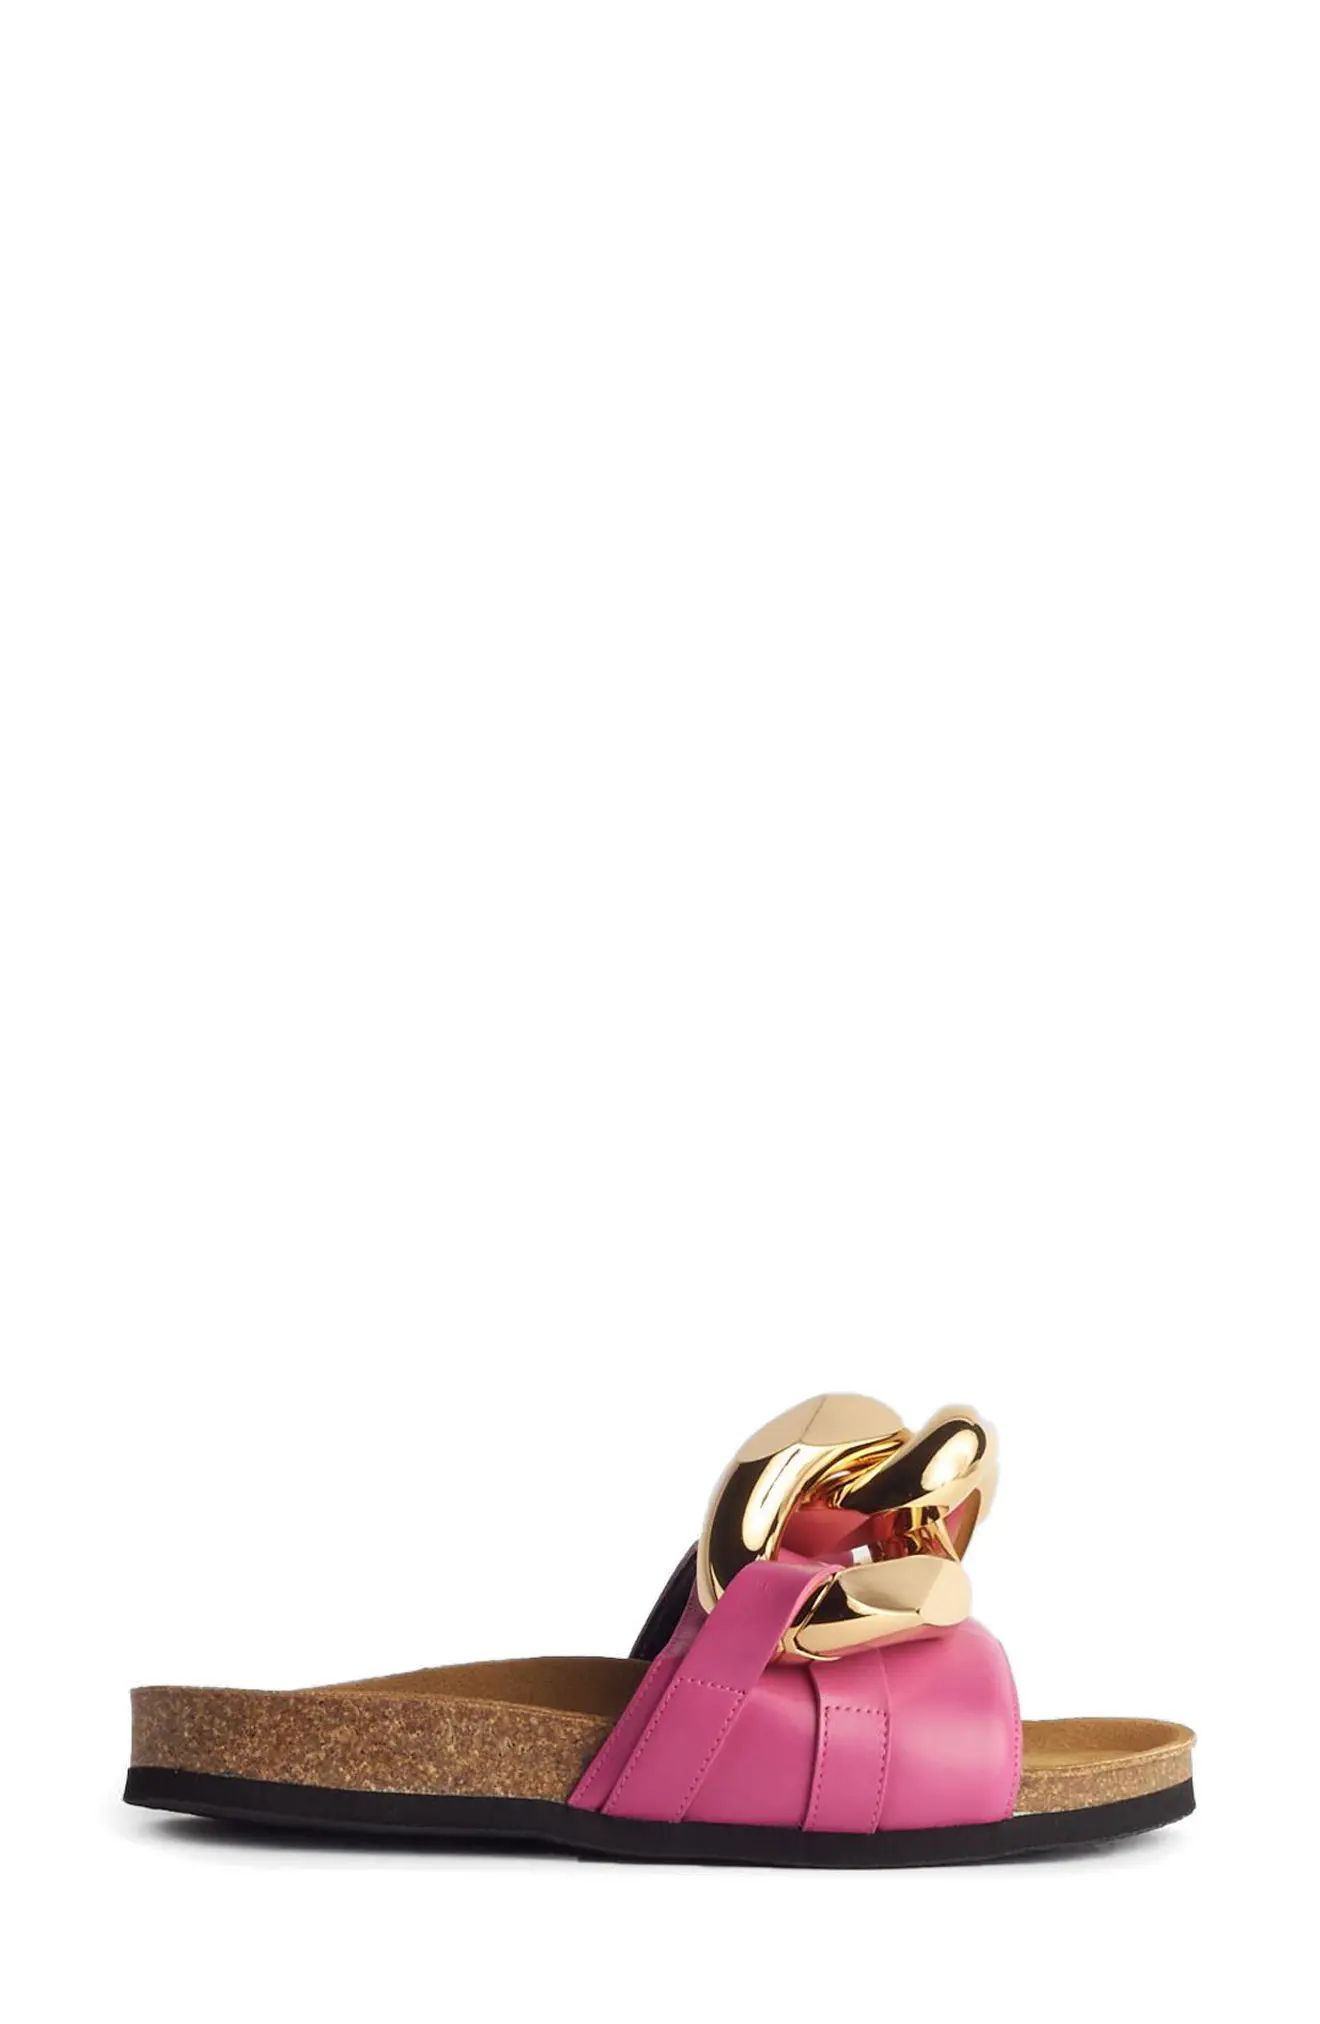 JW Anderson Chain Link Slide Sandal in Fuchsia at Nordstrom, Size 10Us | Nordstrom